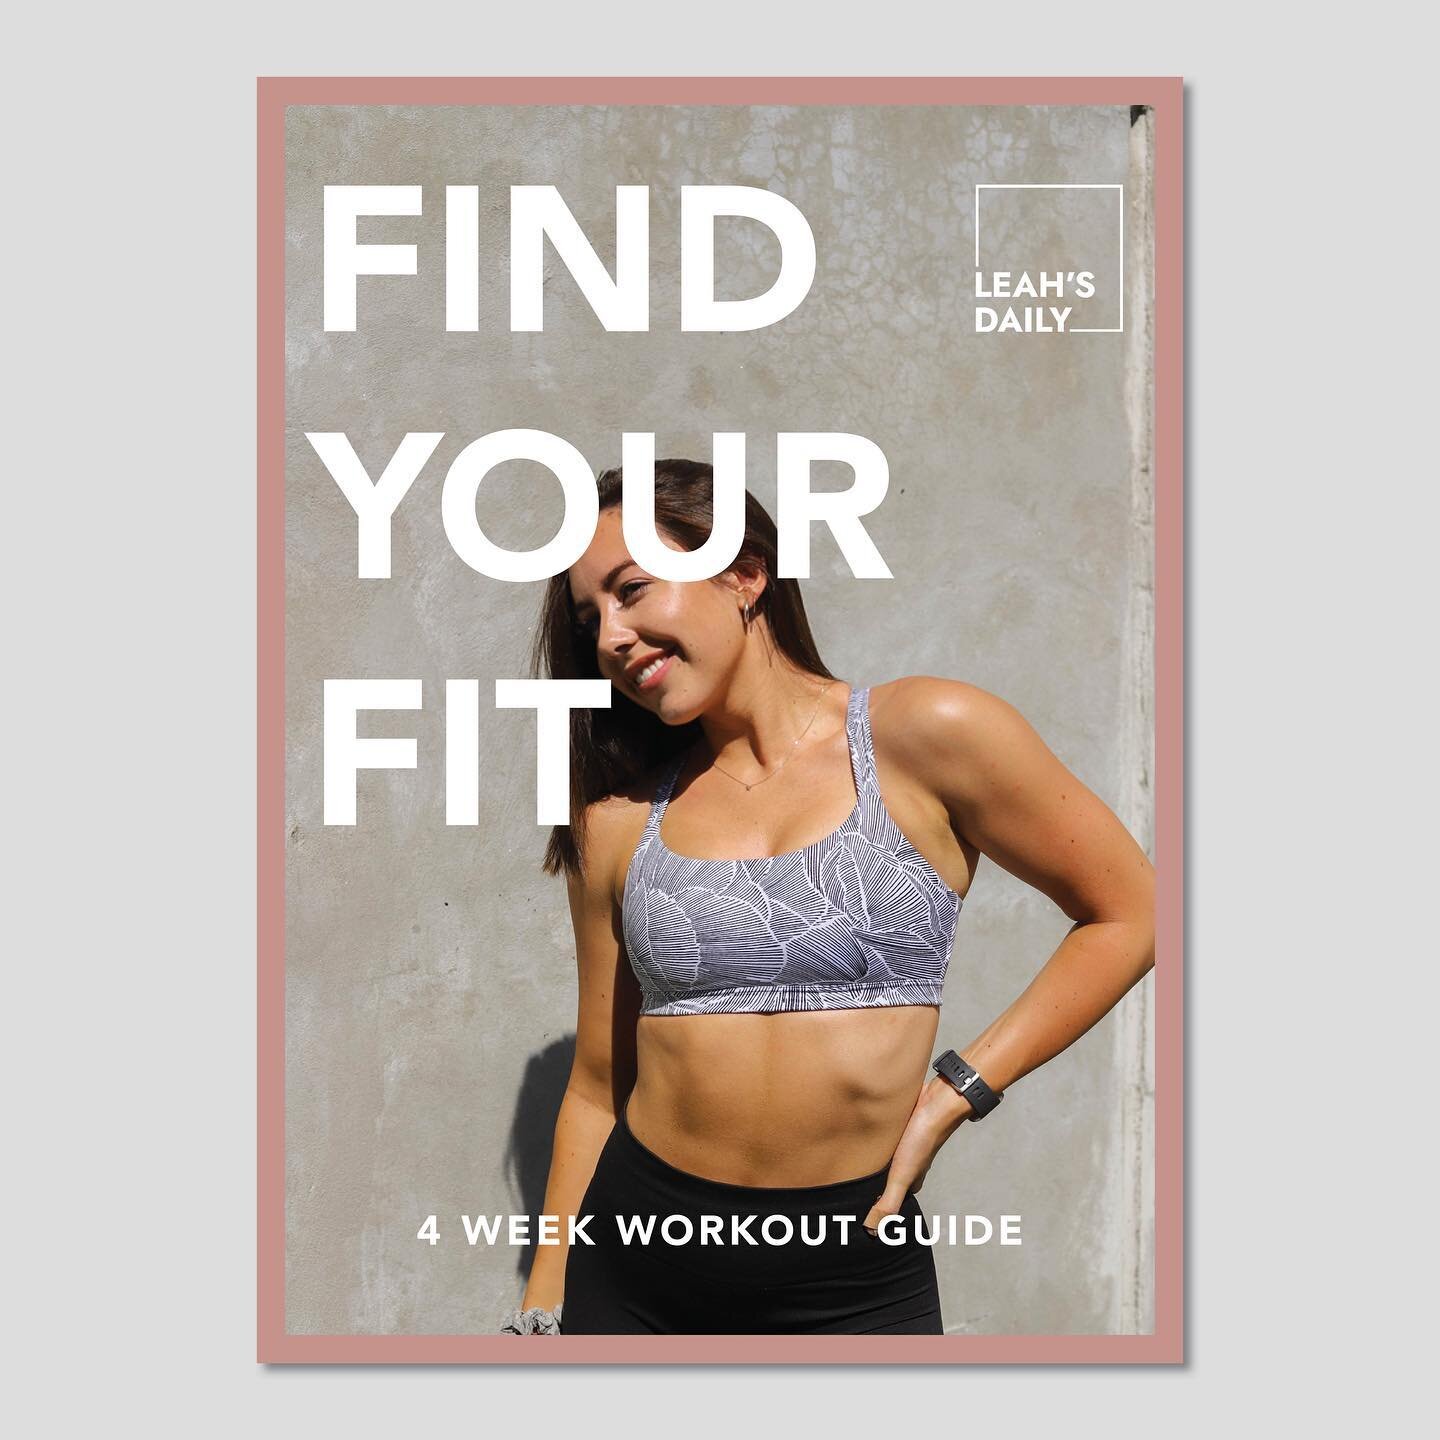 eBook created for @leahs.daily! A 4-week workout guide, put together in 29 pages optimized for digital use